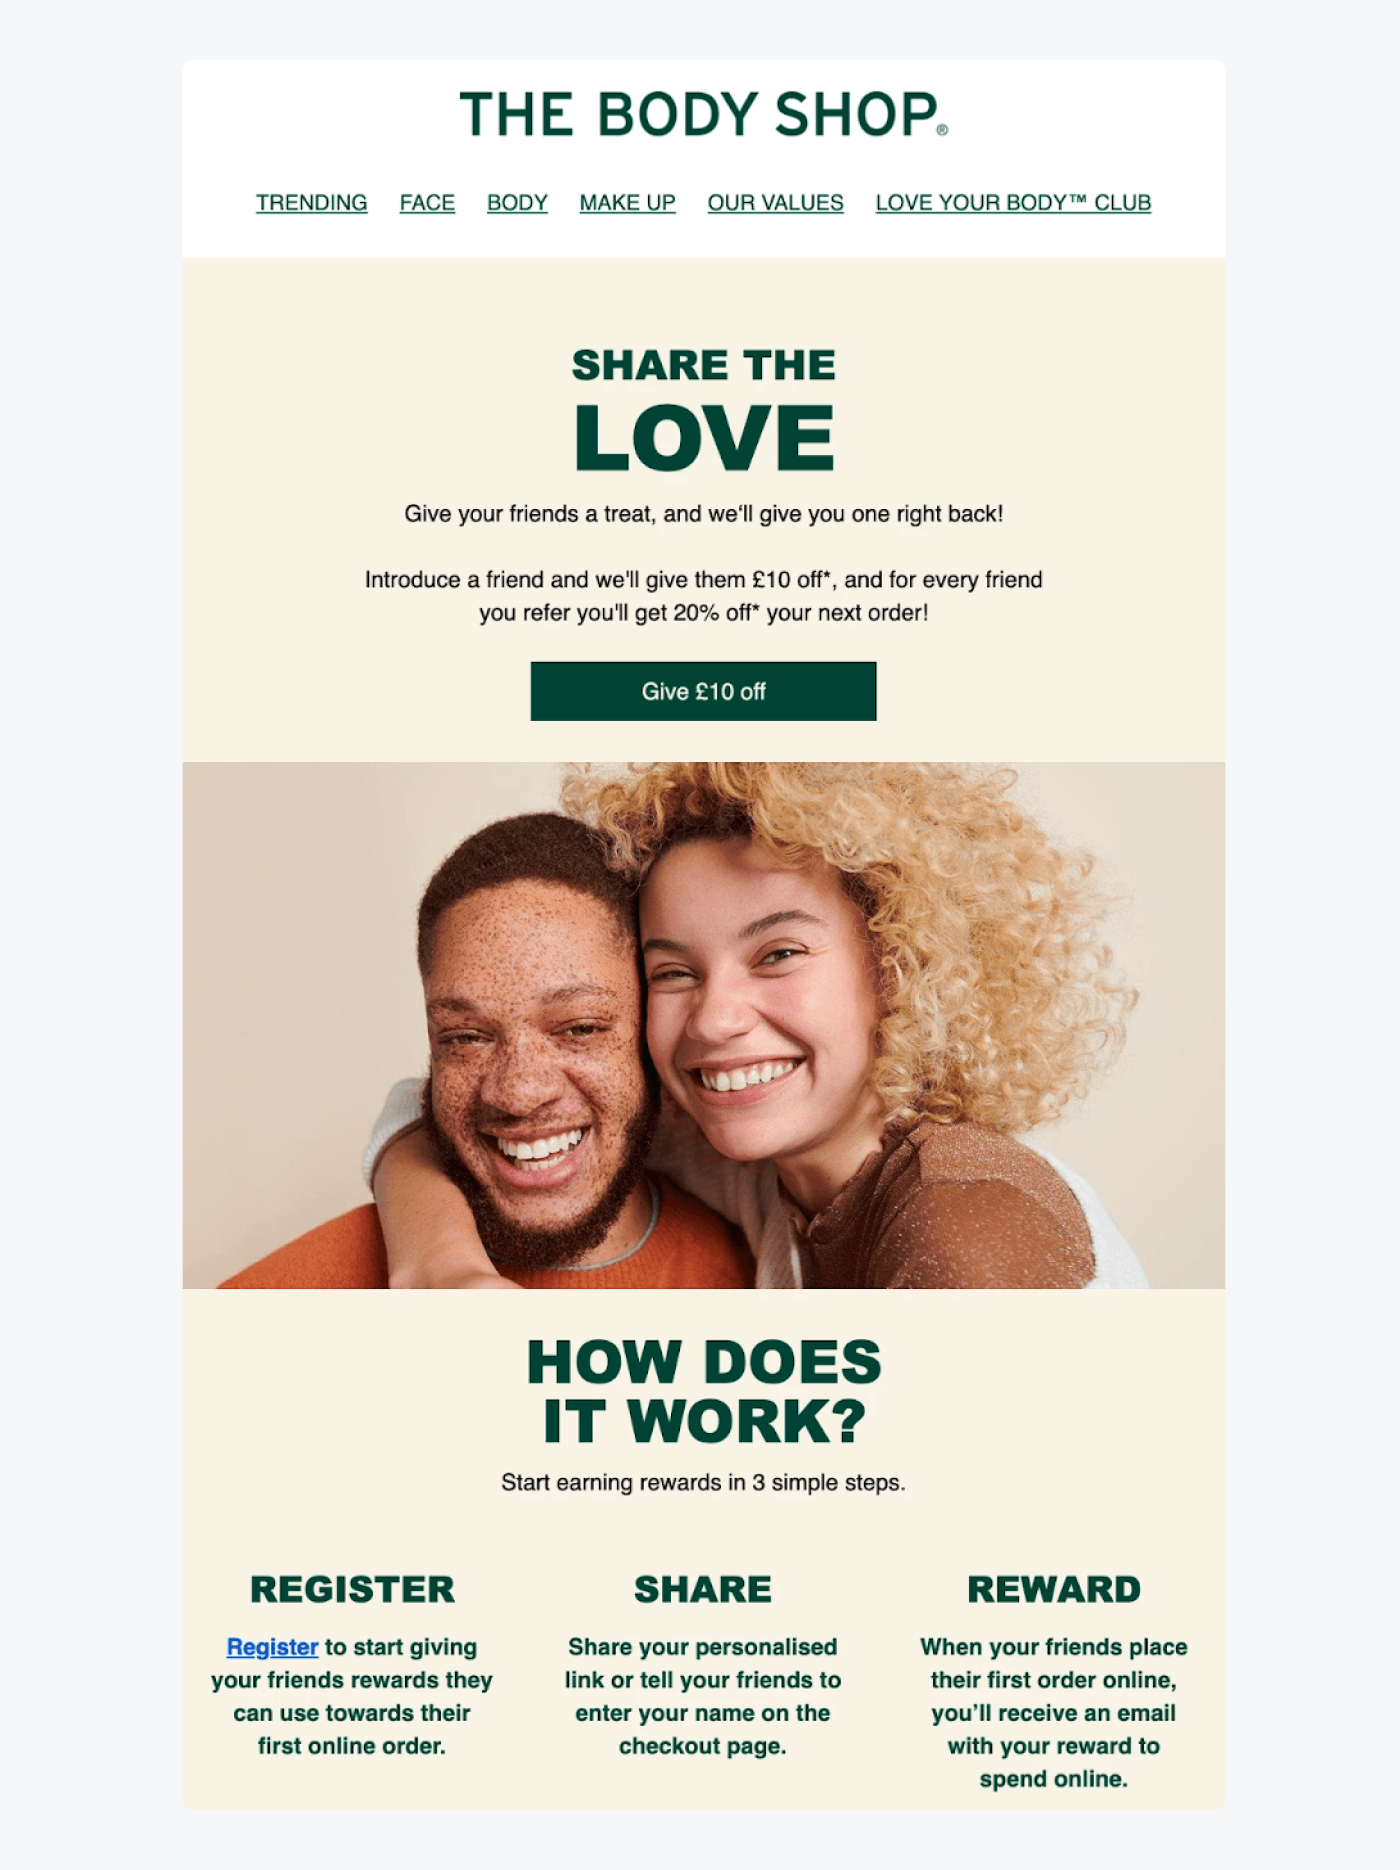 the body shop referral program in action